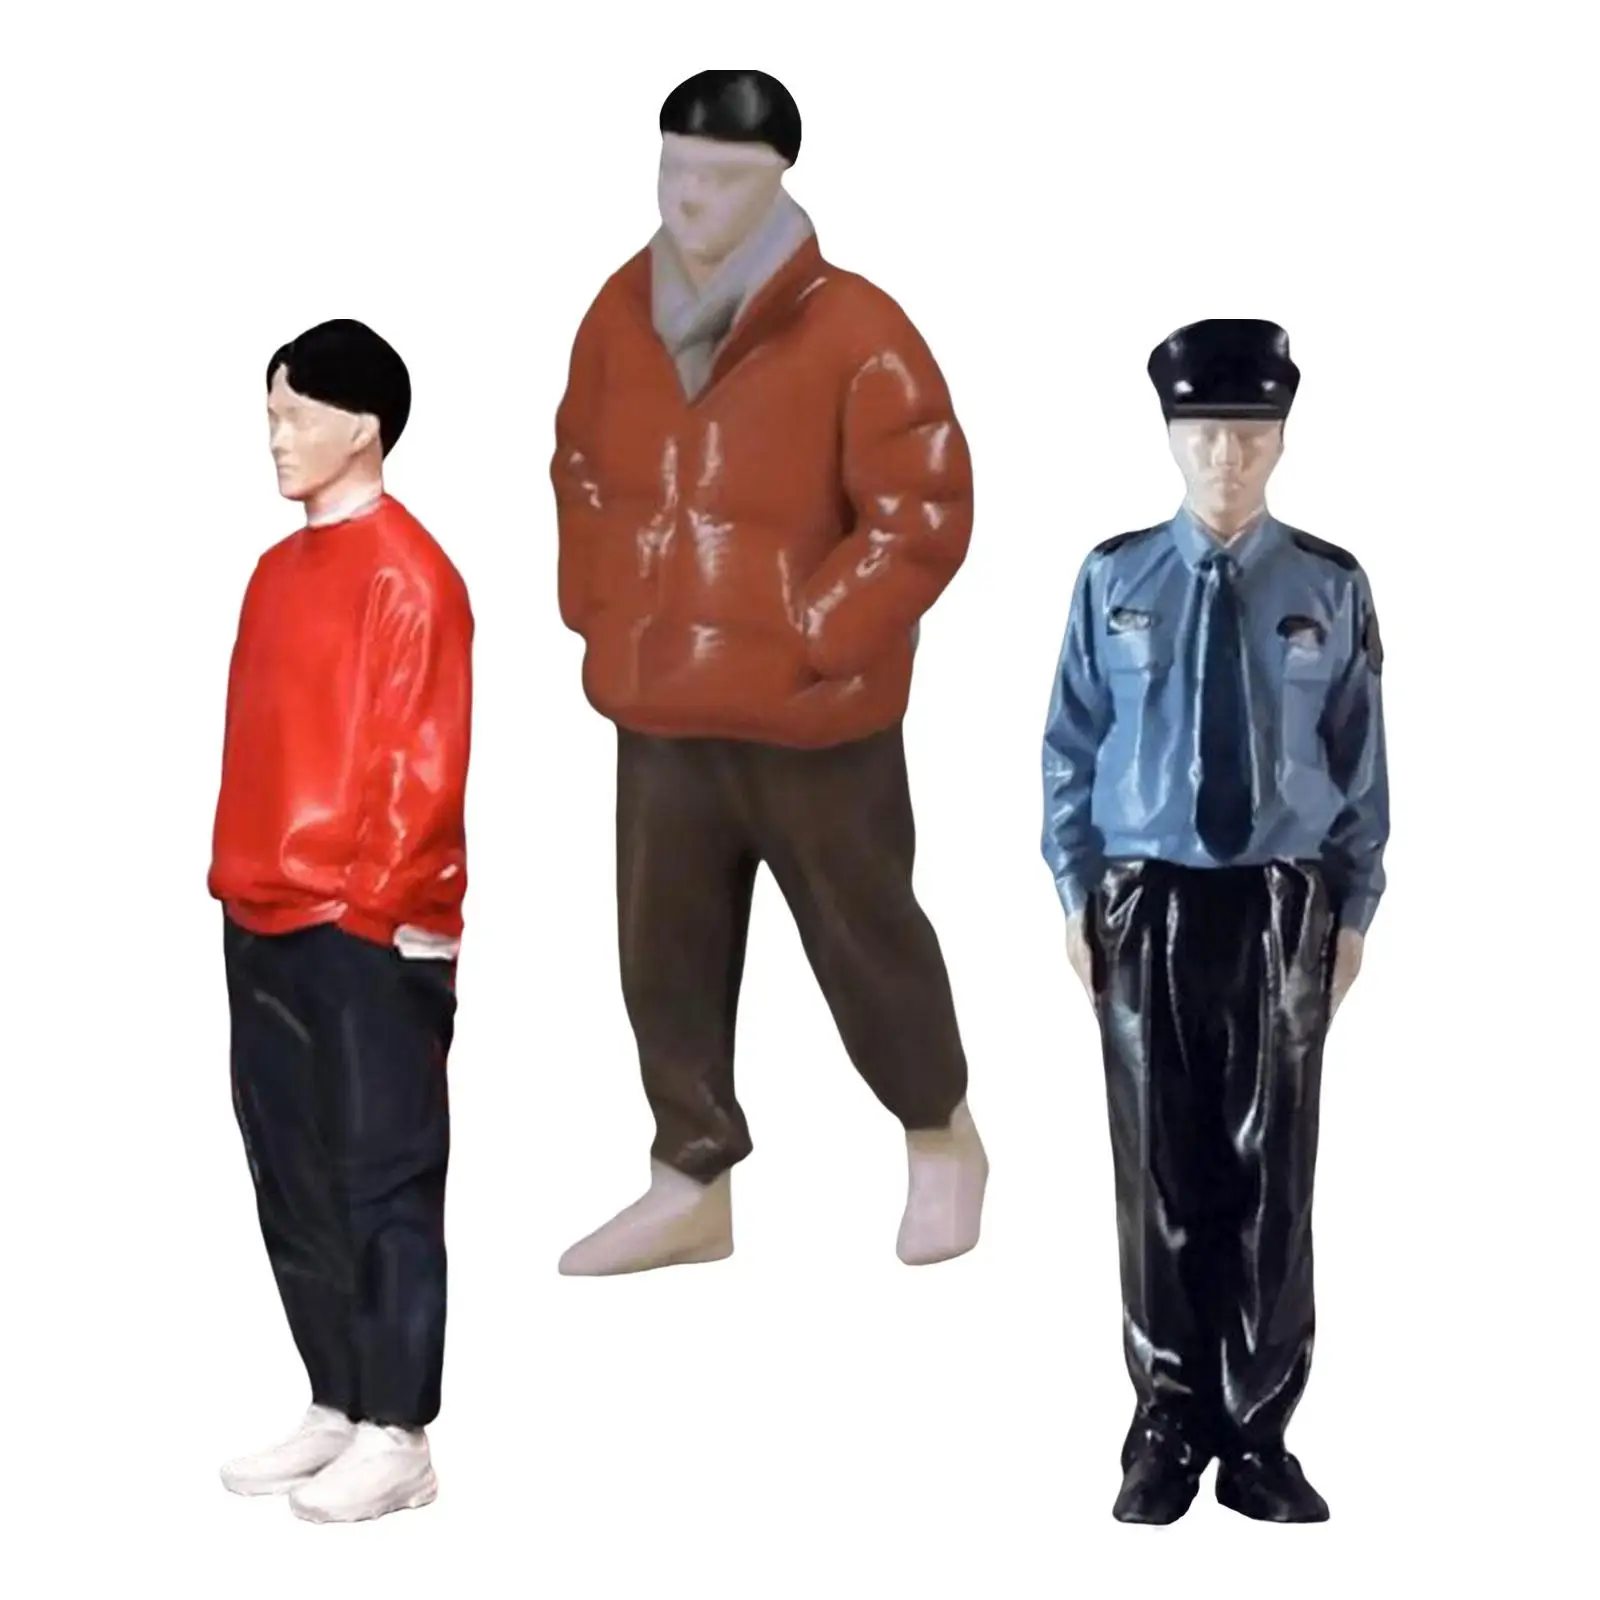 1/32 Models People Figures Three People for Miniature Scene Micro Landscapes